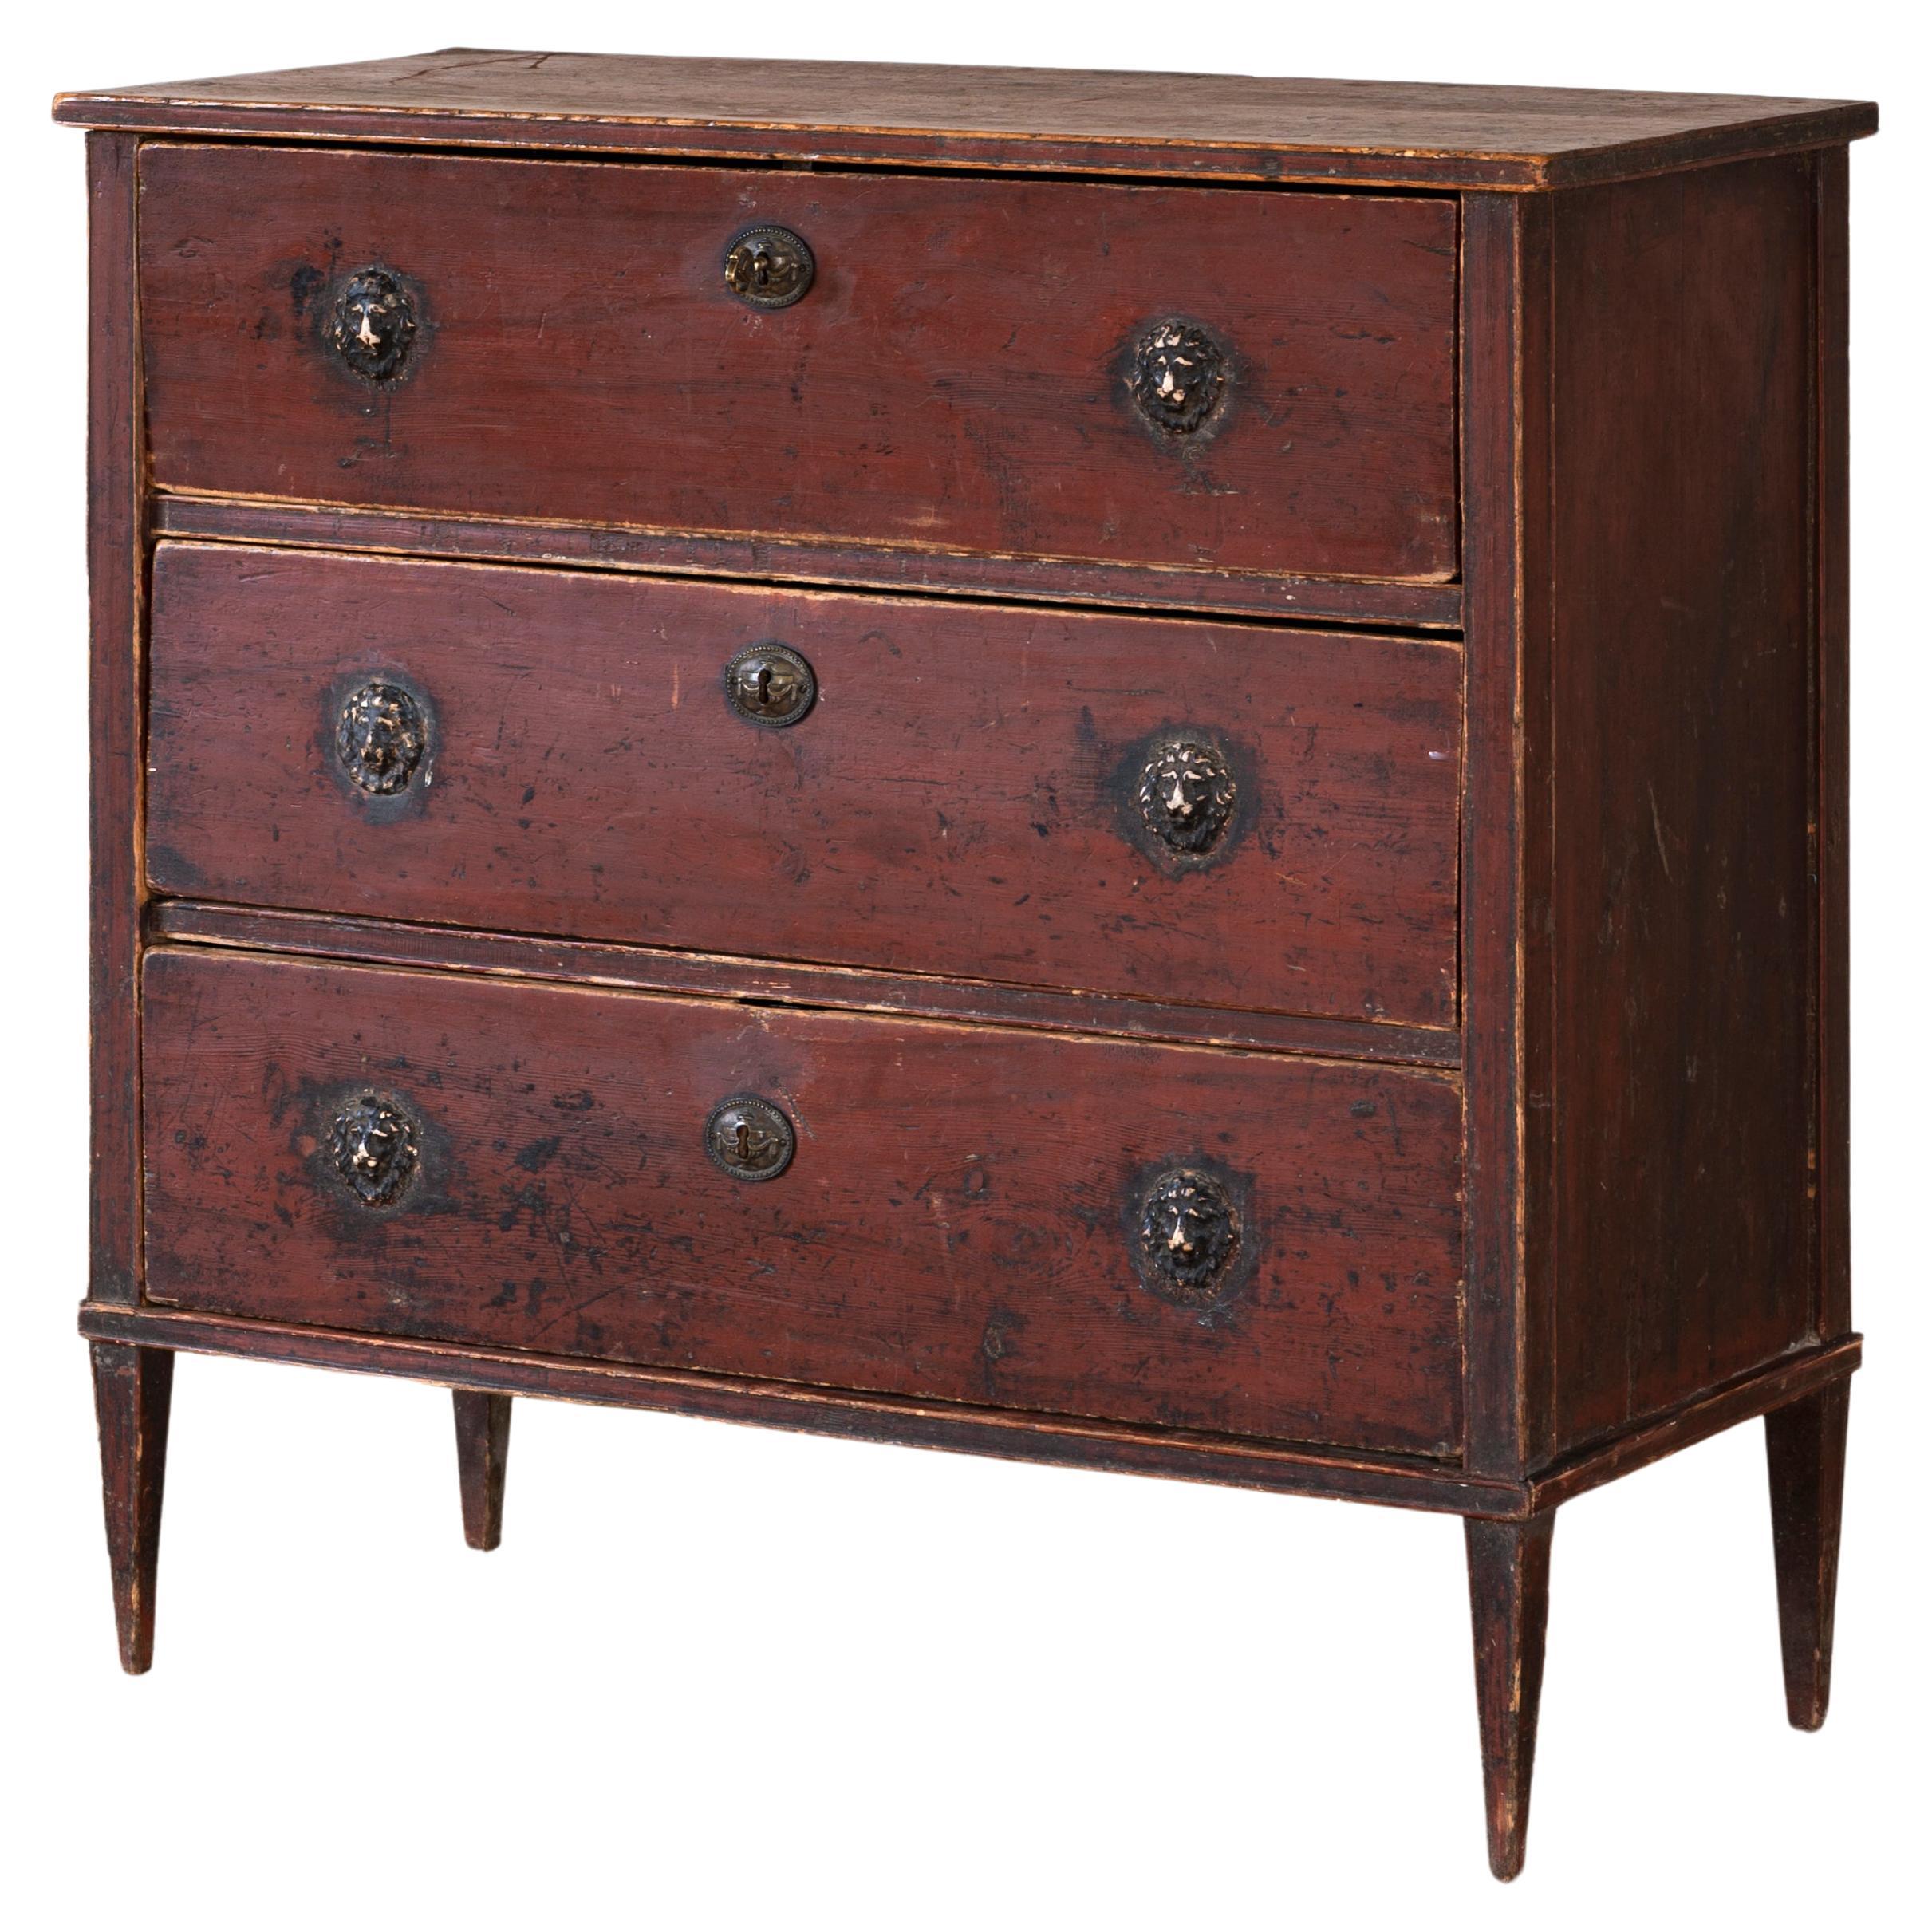 Unusual 18th Century Swedish Provincial Gustavian Chest of Drawers